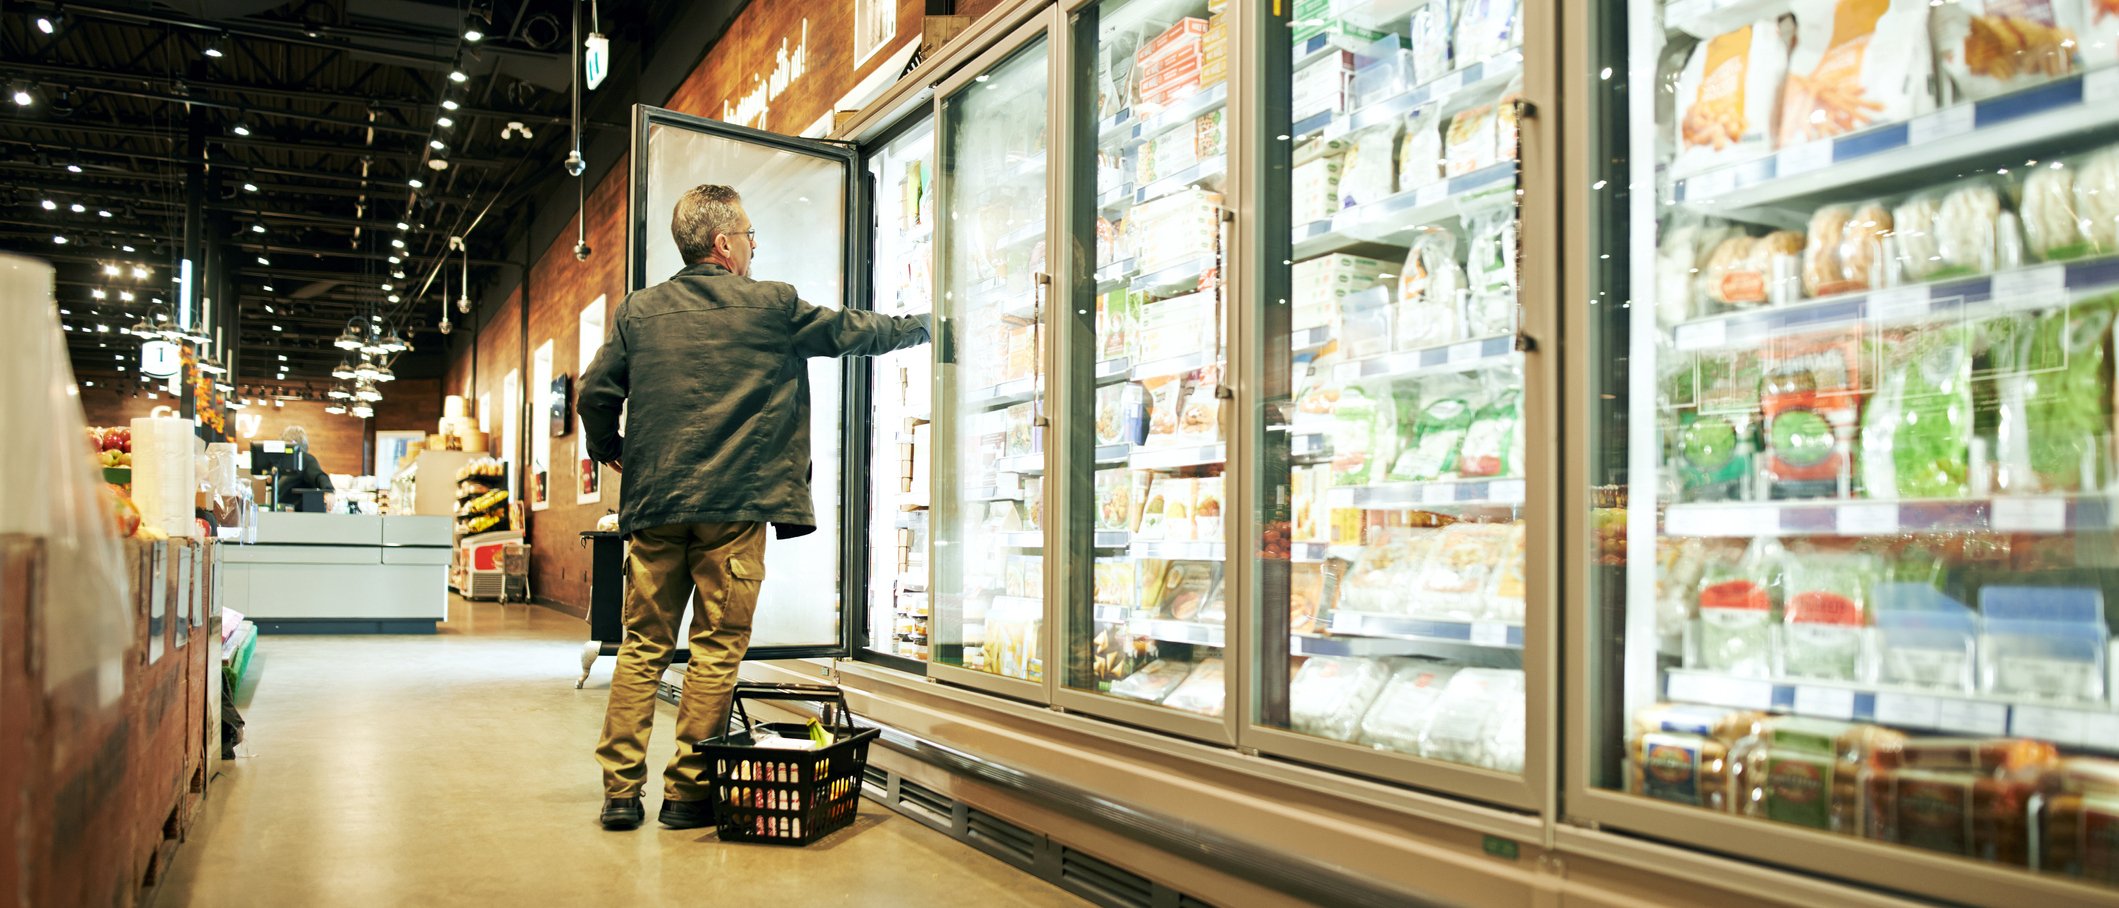 Shot of a mature man shopping in the cold produce section of a supermarket.